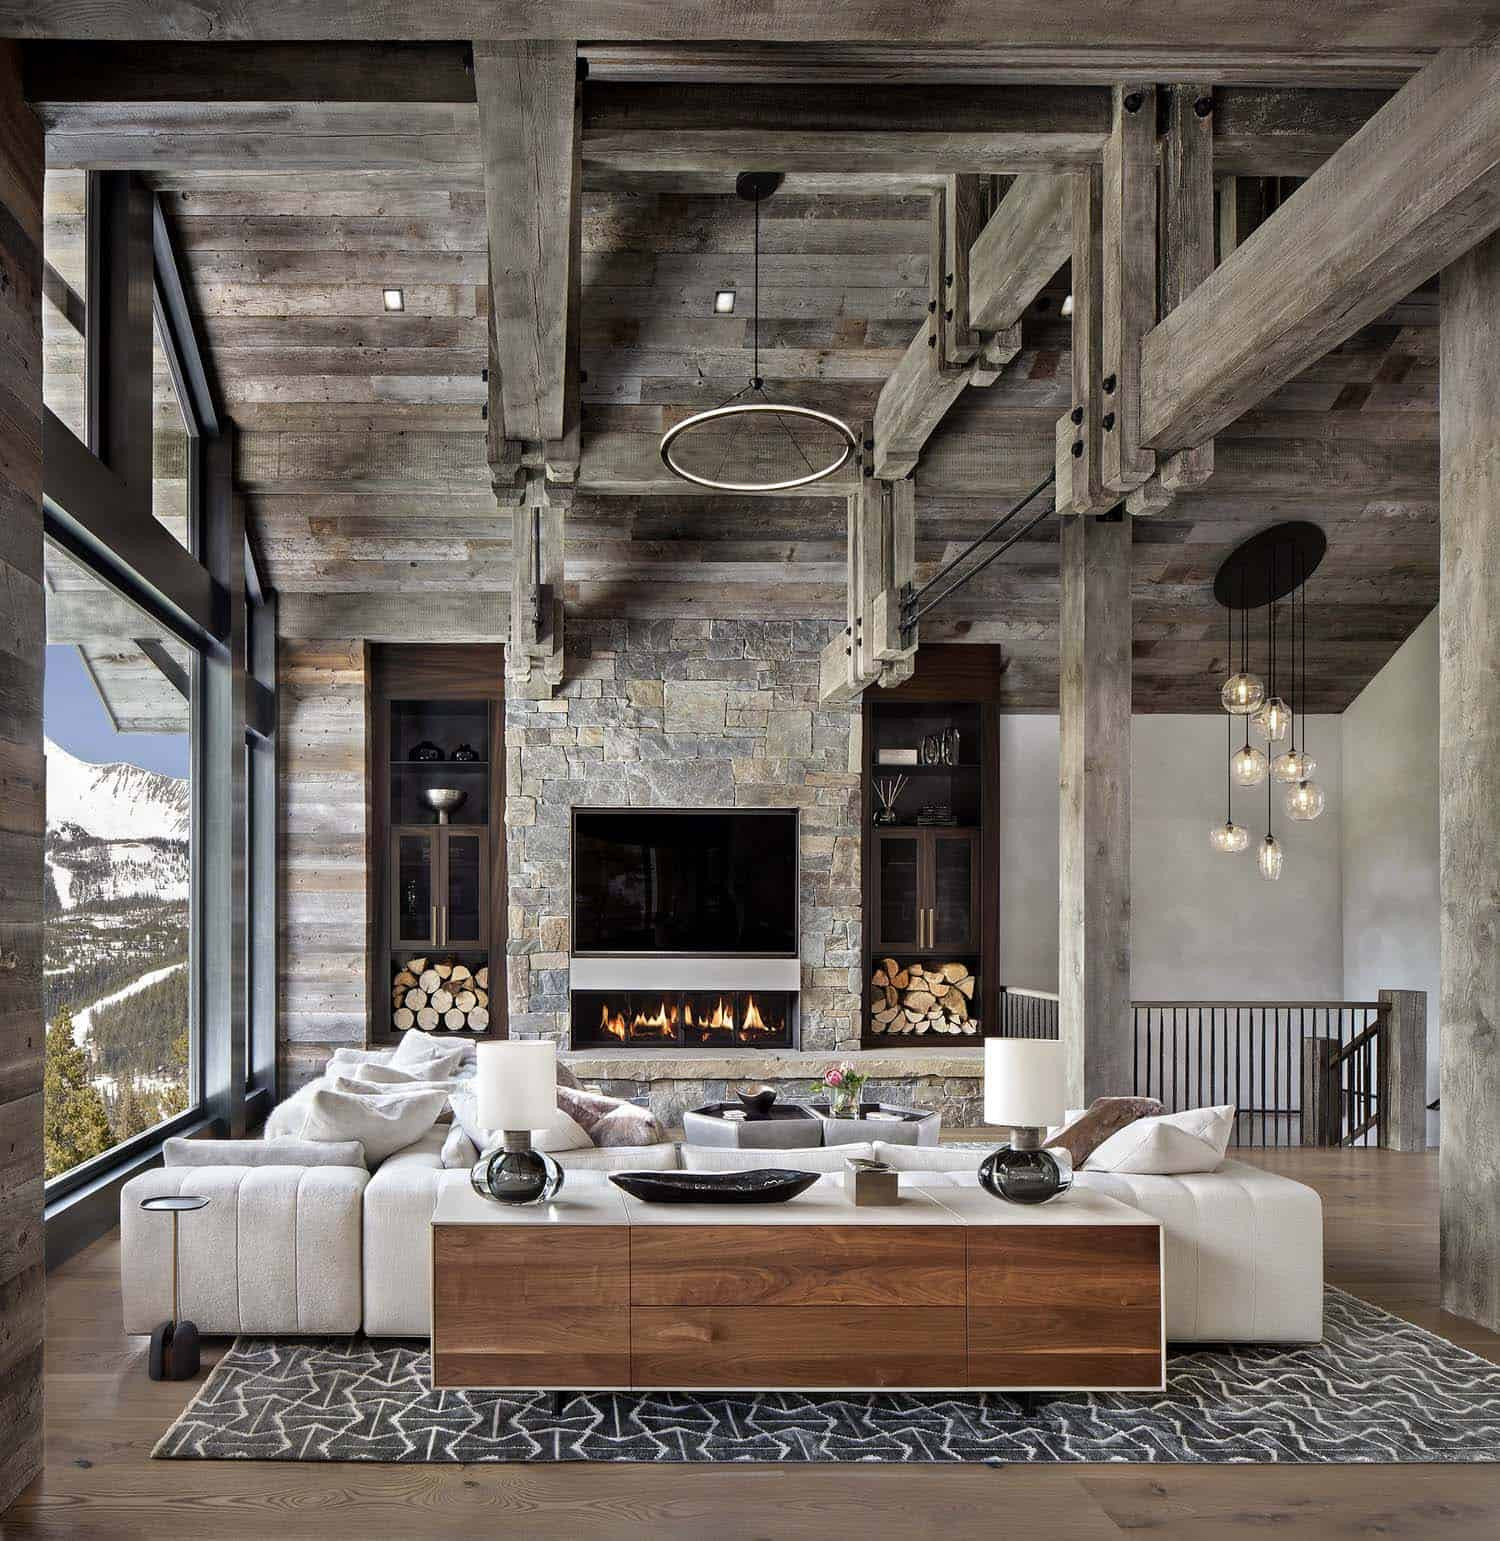 Contemporary Rustic Living Room
 Modern rustic home set amidst the grandeur of the Rocky